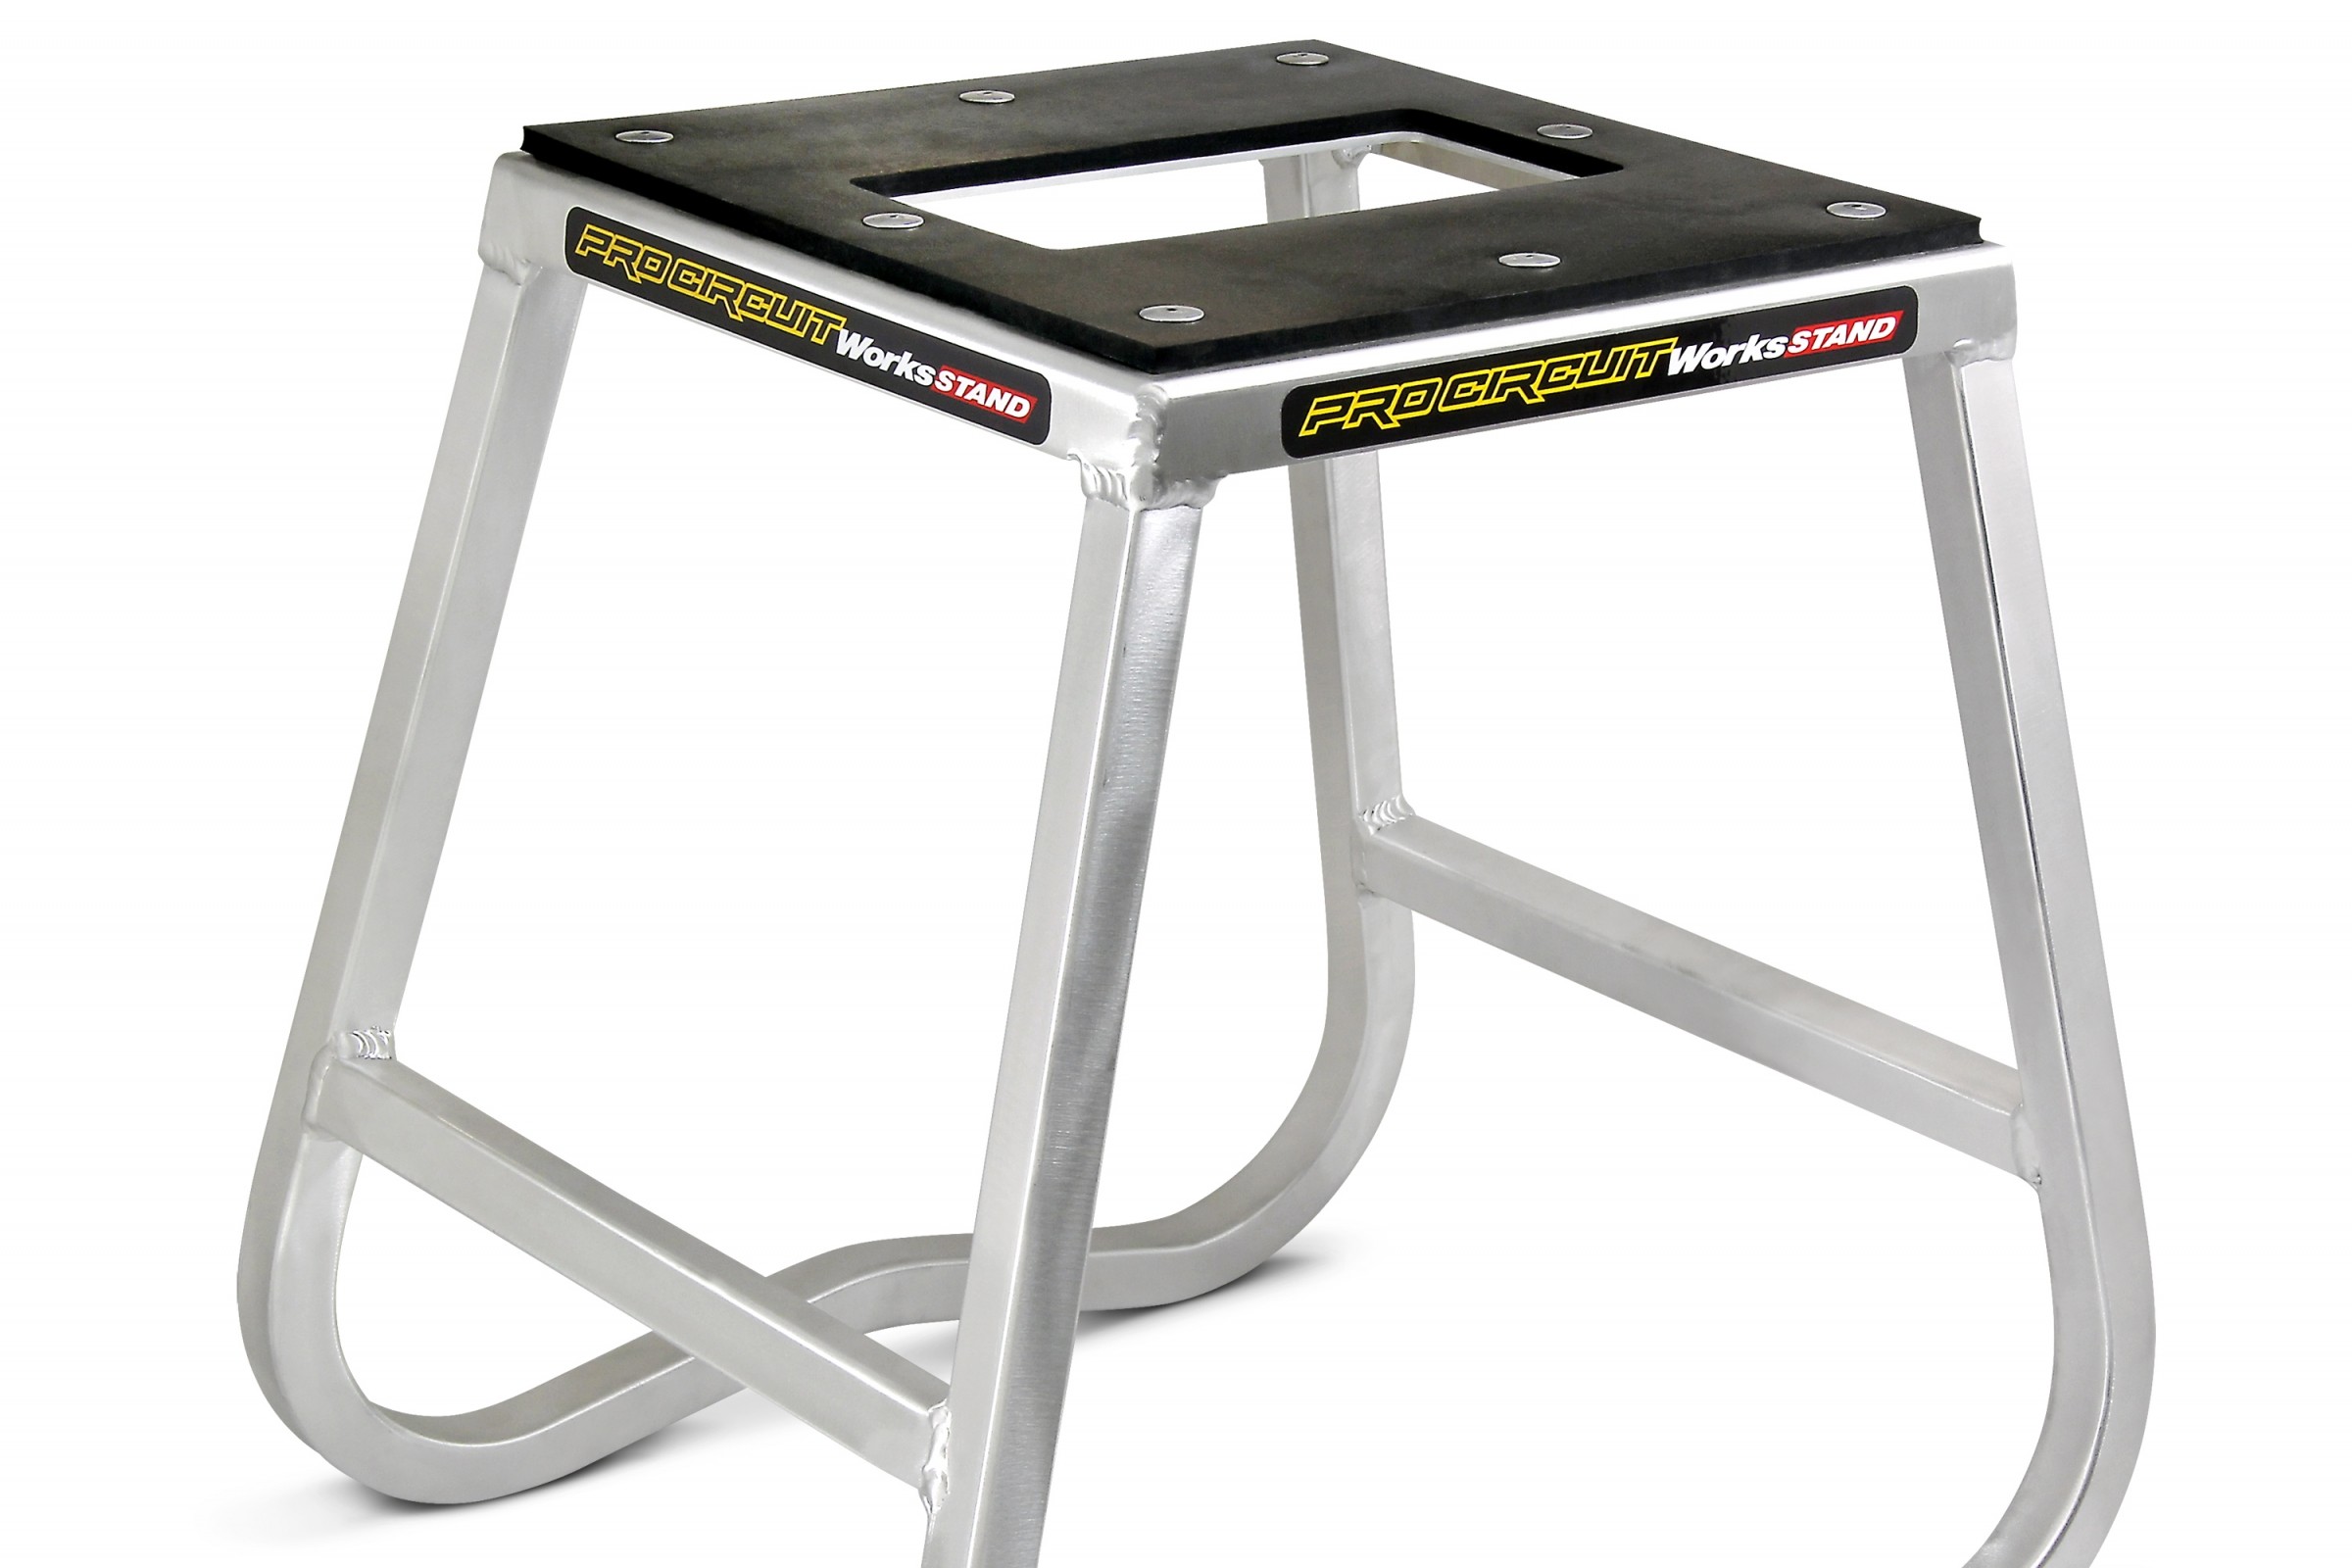 Pro Circuit Works Bike Stand Racer X